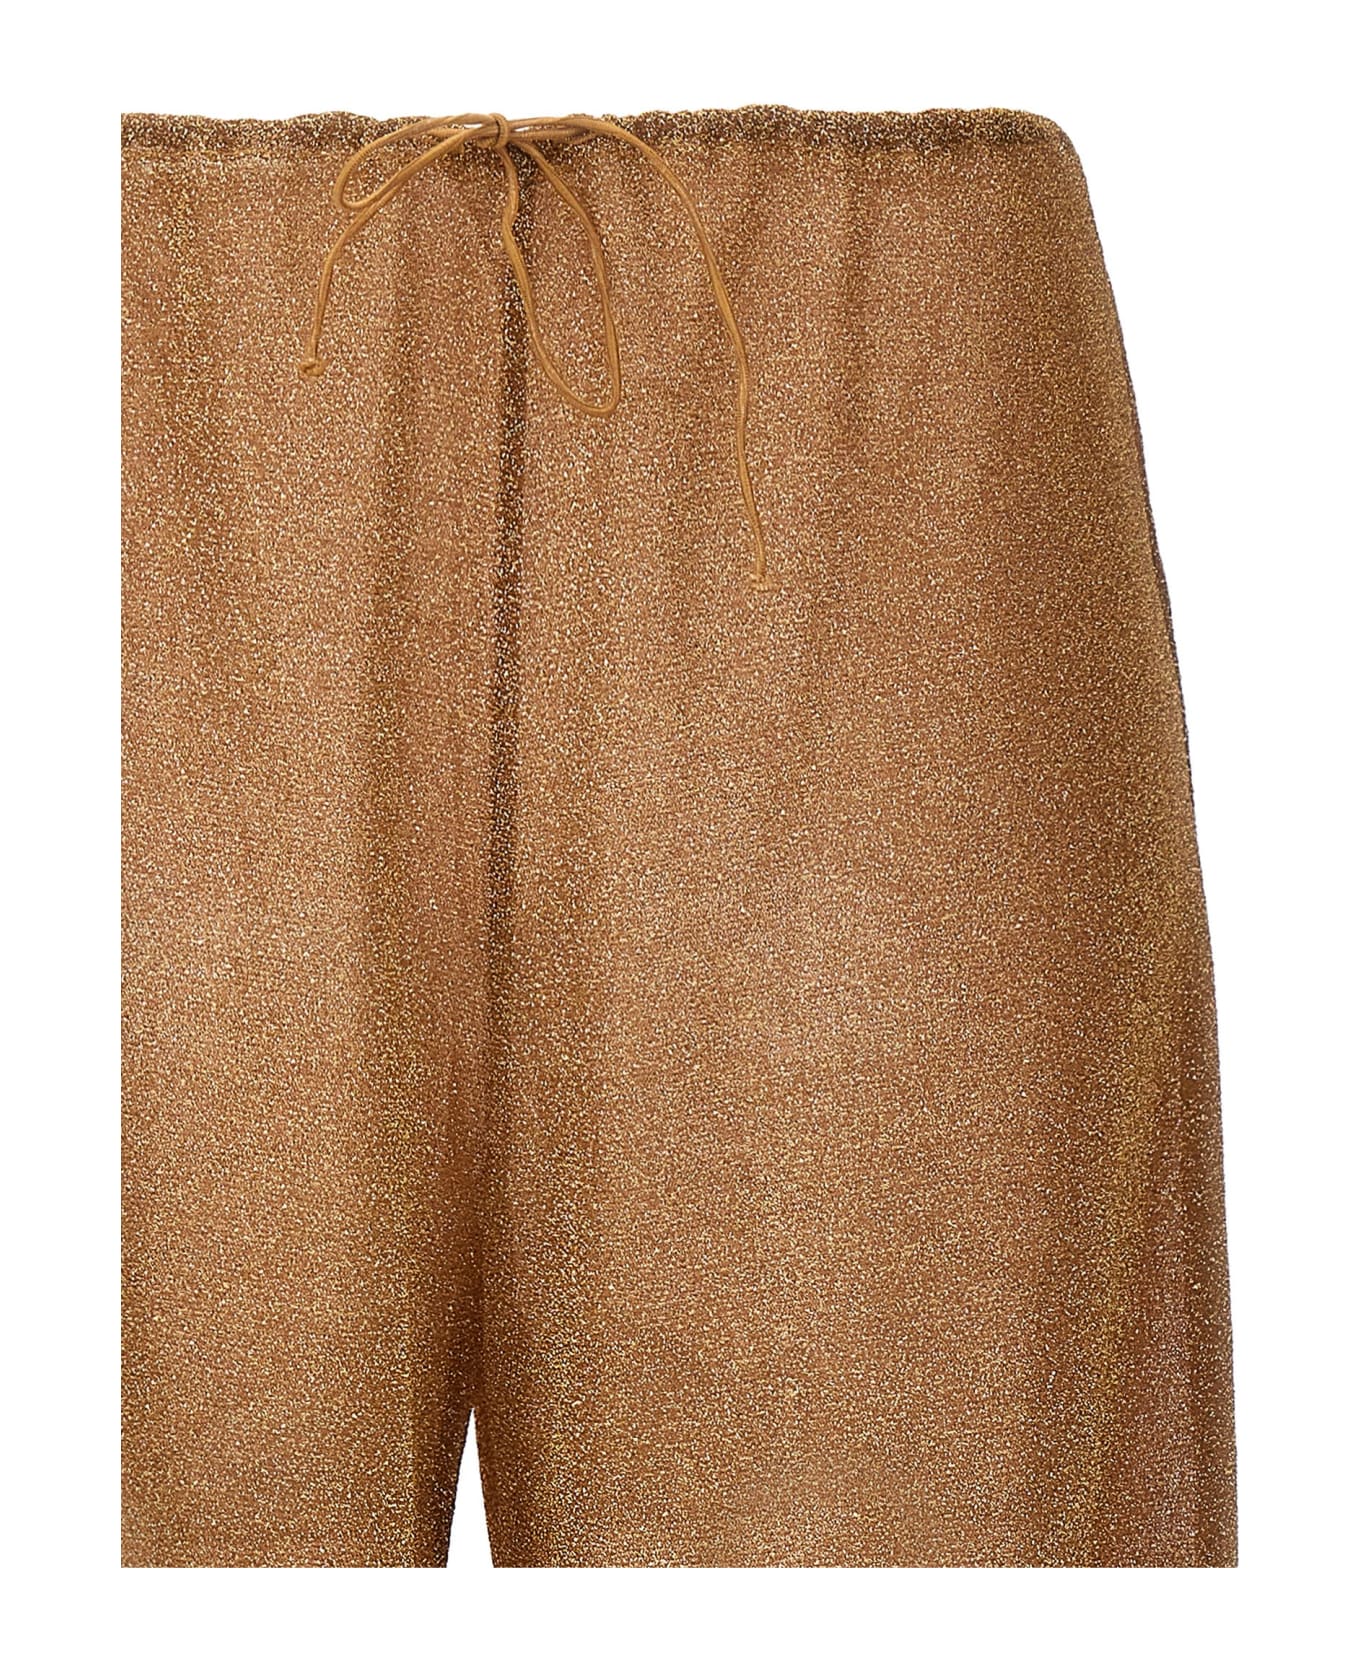 Oseree 'lumiere Plumage' Pants - Toffee